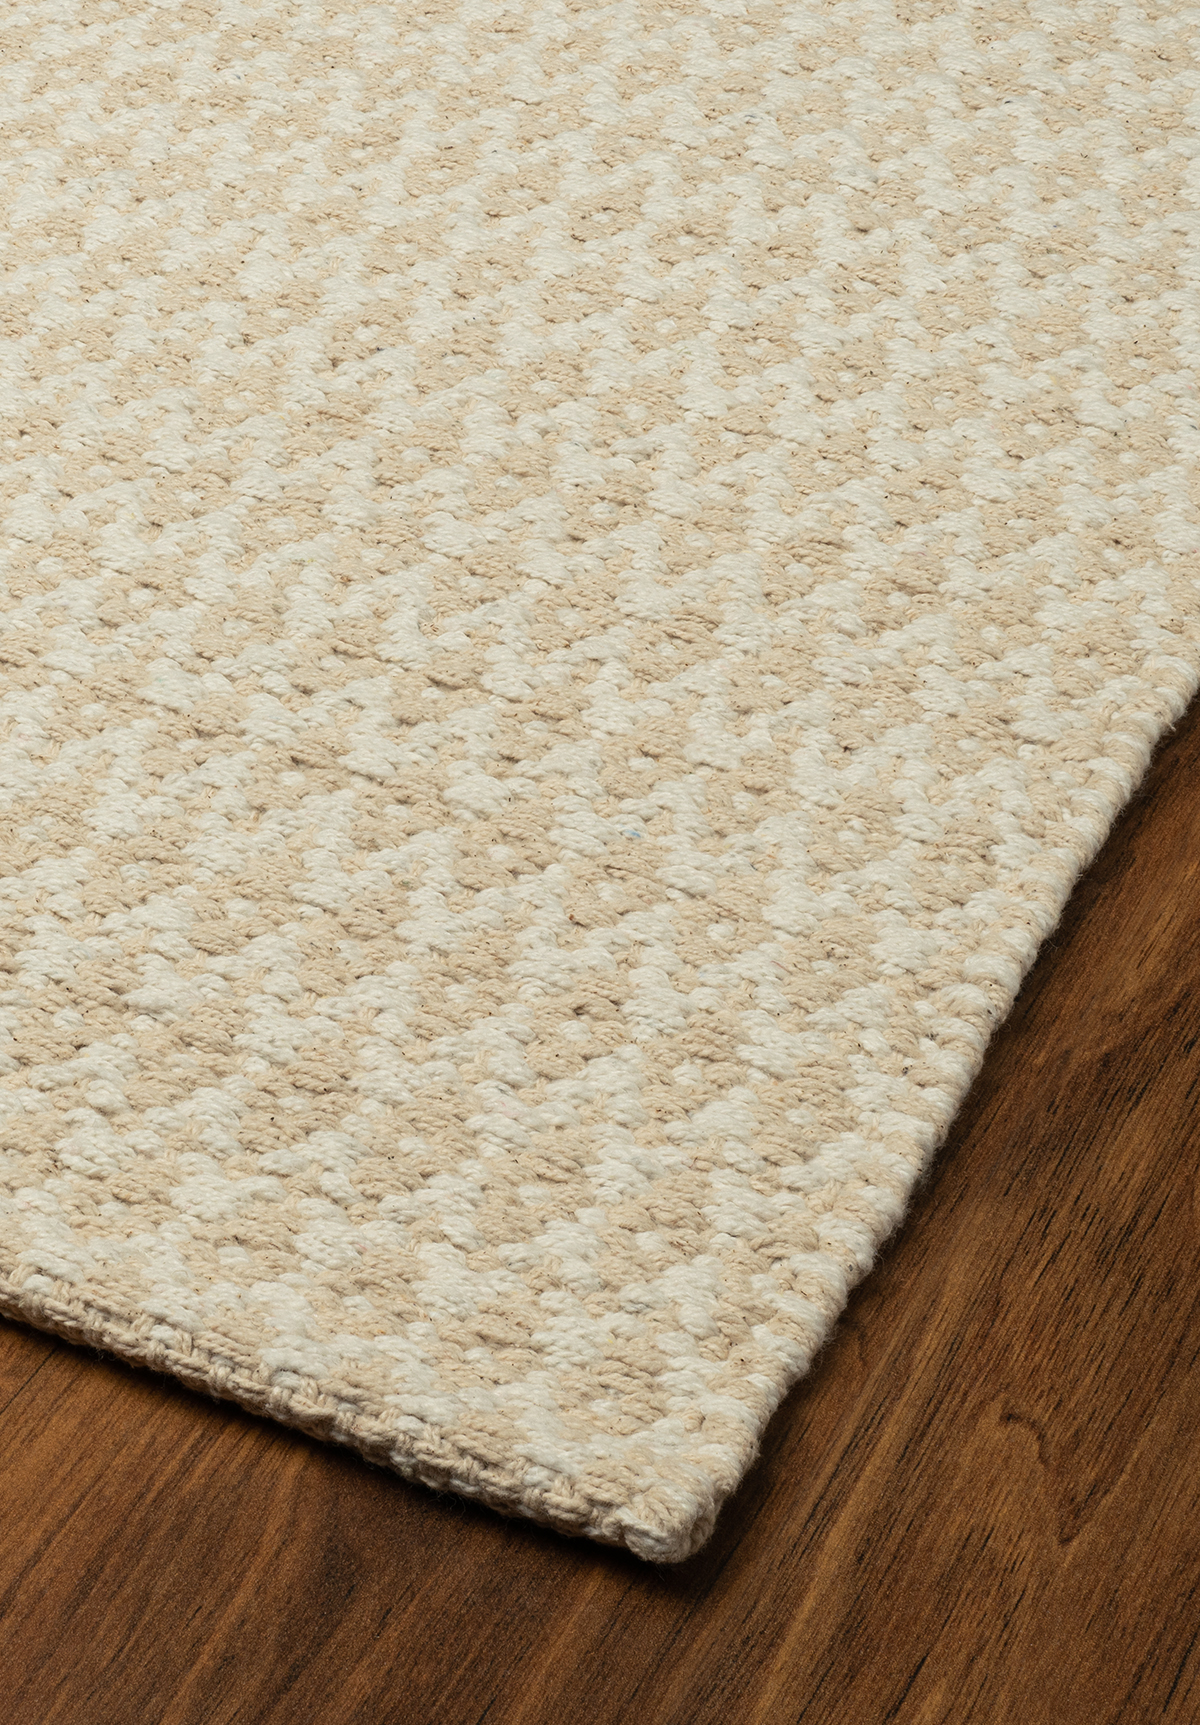 Natural rubber rug gripper of chemical-free latex, by Earth Weave.